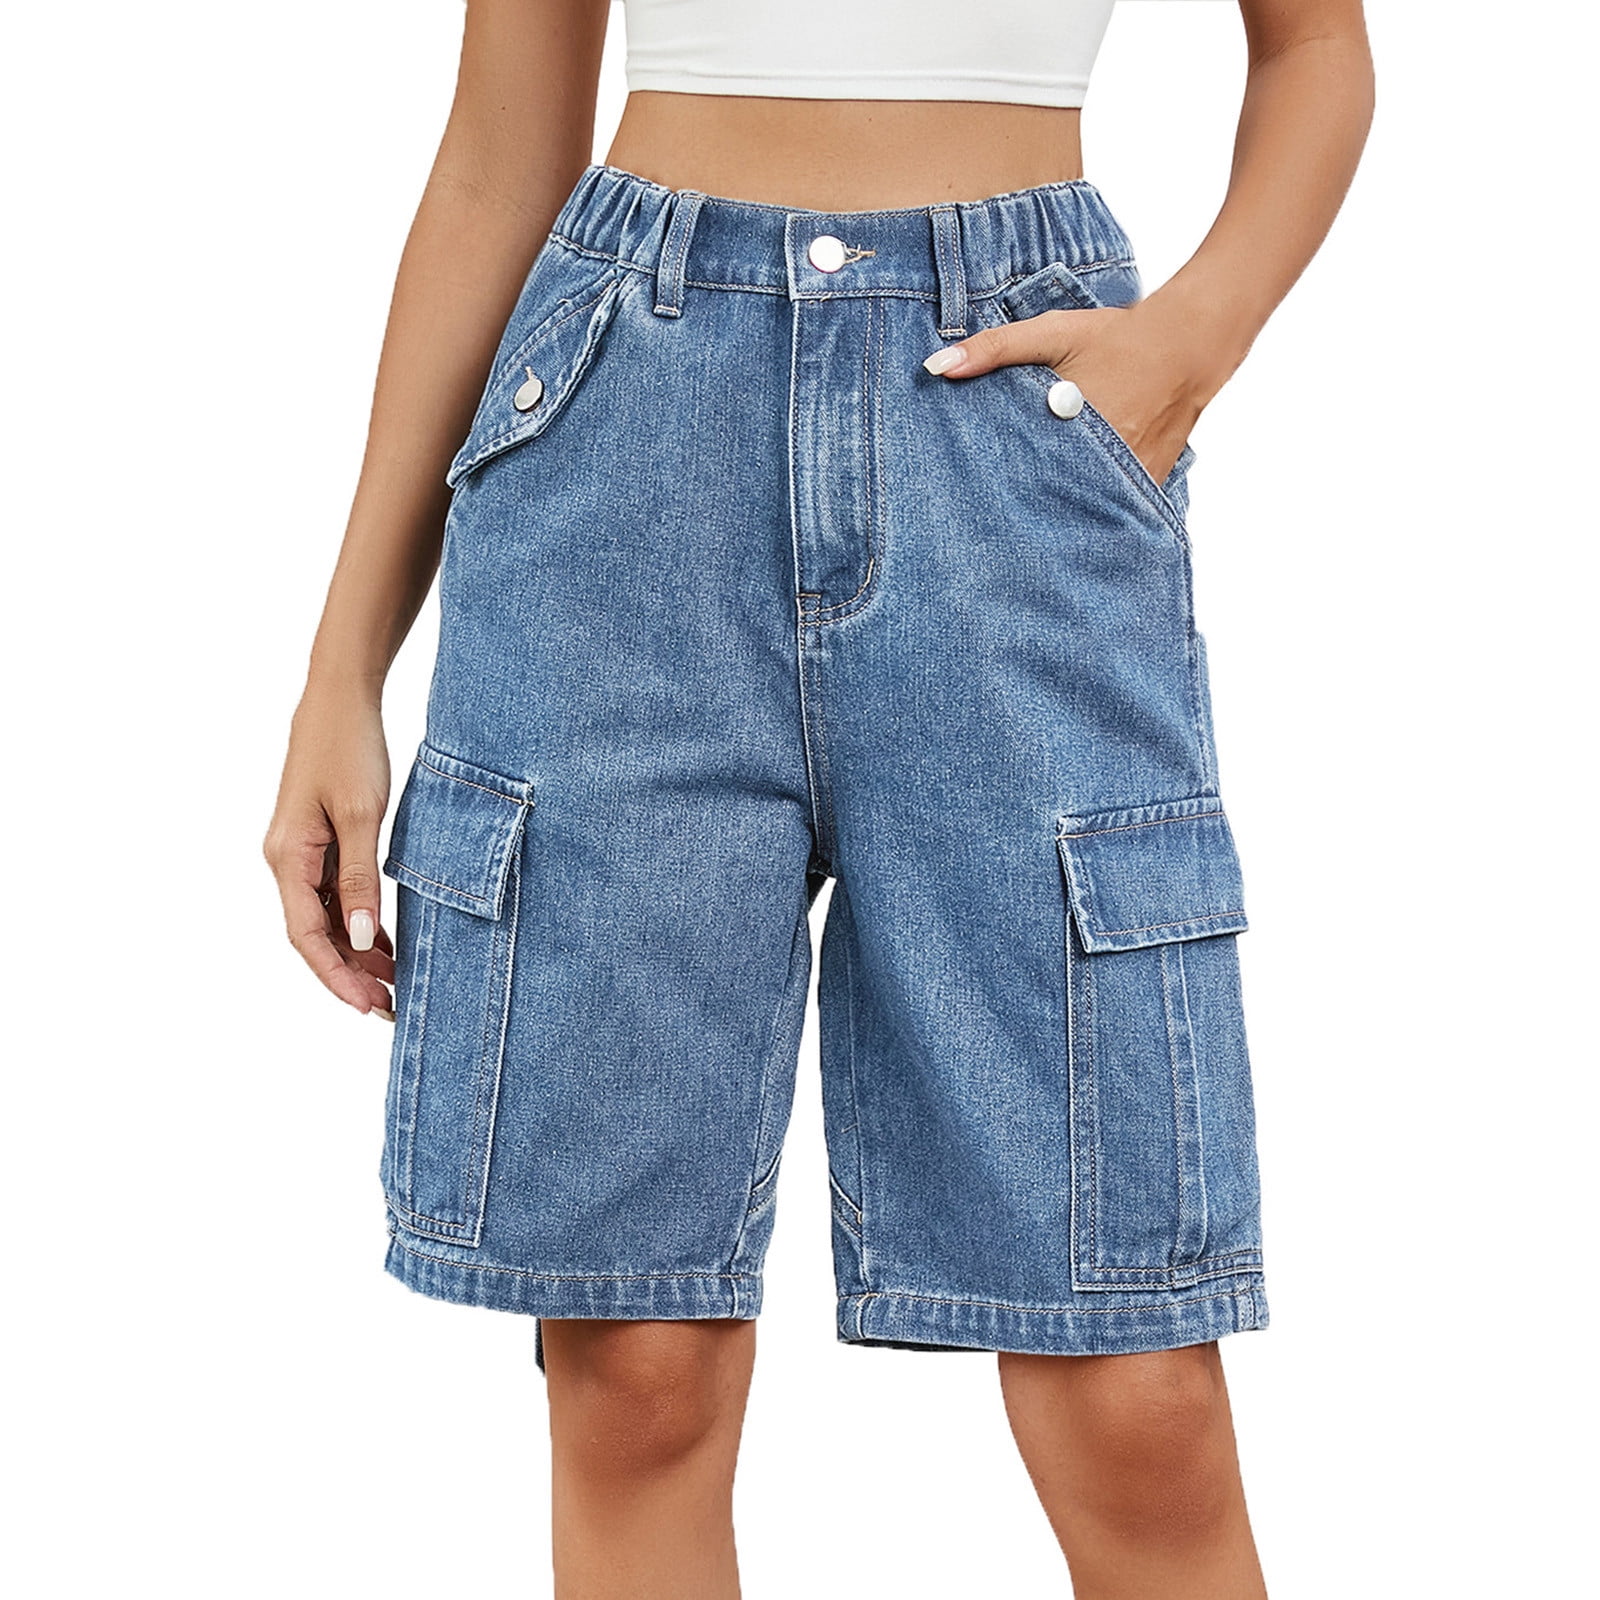 QATAINLAV Jeans Shorts for Women Casual Button High Waisted Short Jeans ...